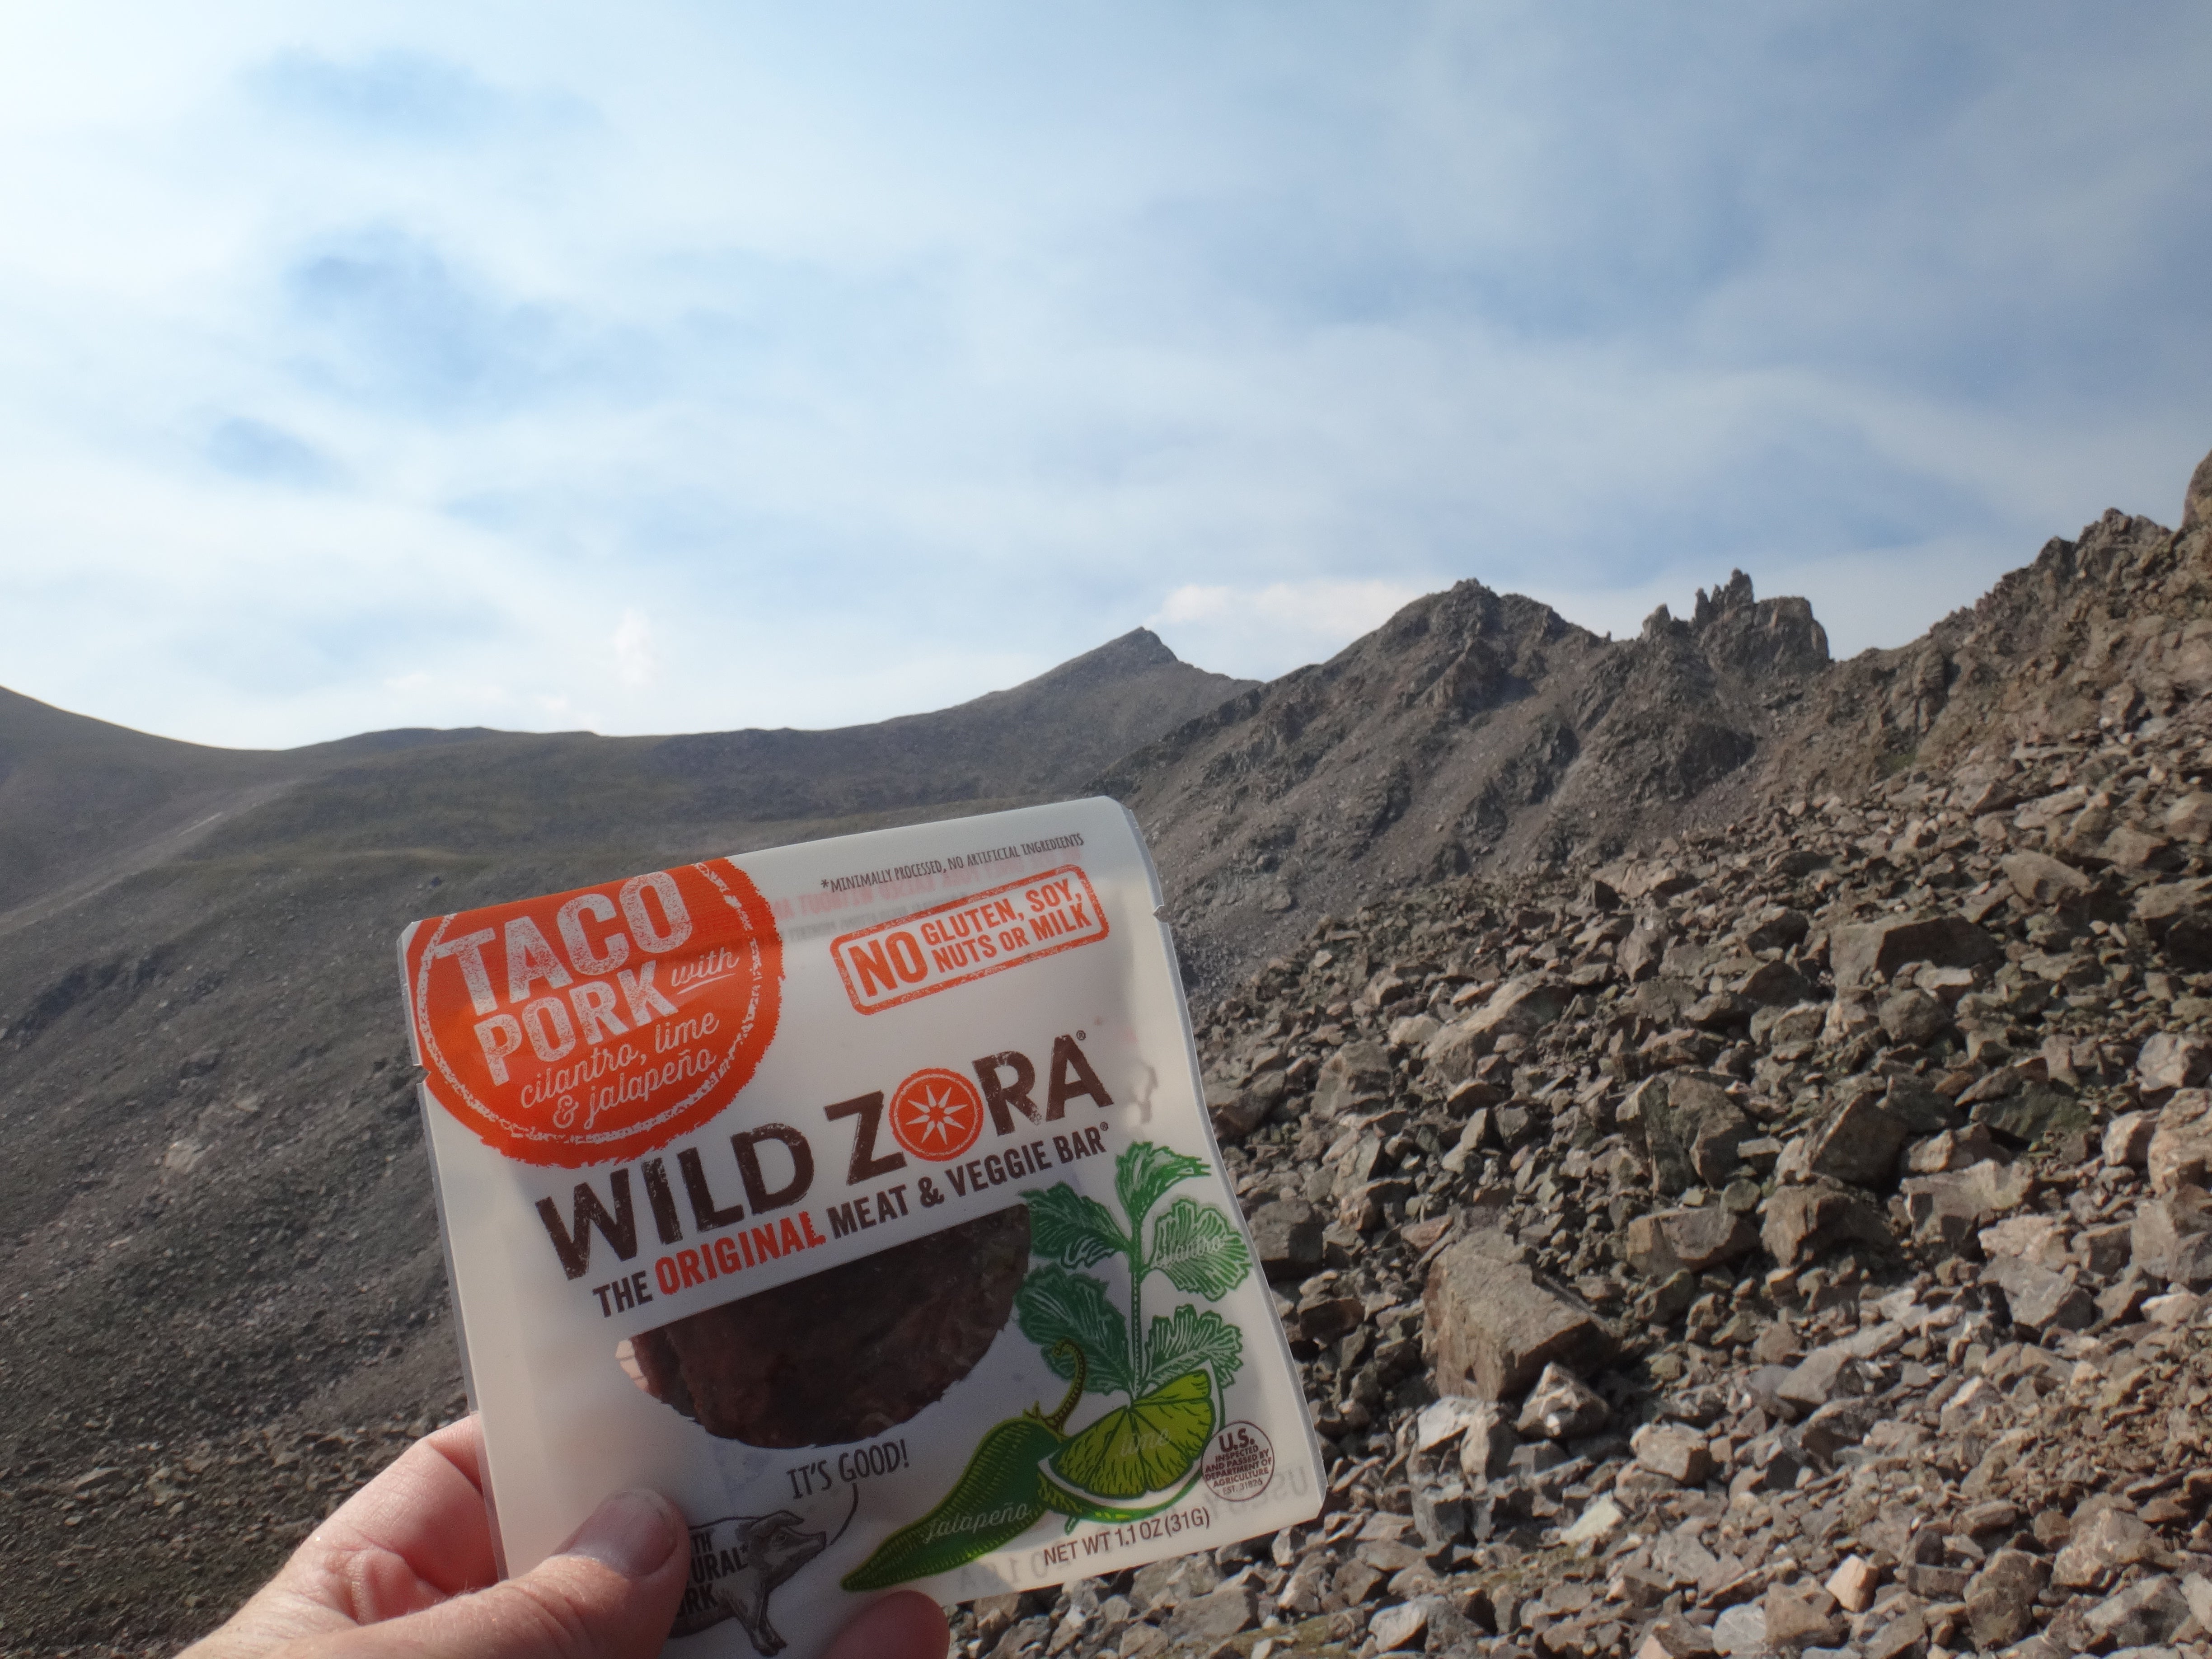 Difference between success and failure when trying to summit can be how you fuel your body.  I used the Wild Zora meat/veggie bars on the way to the top!